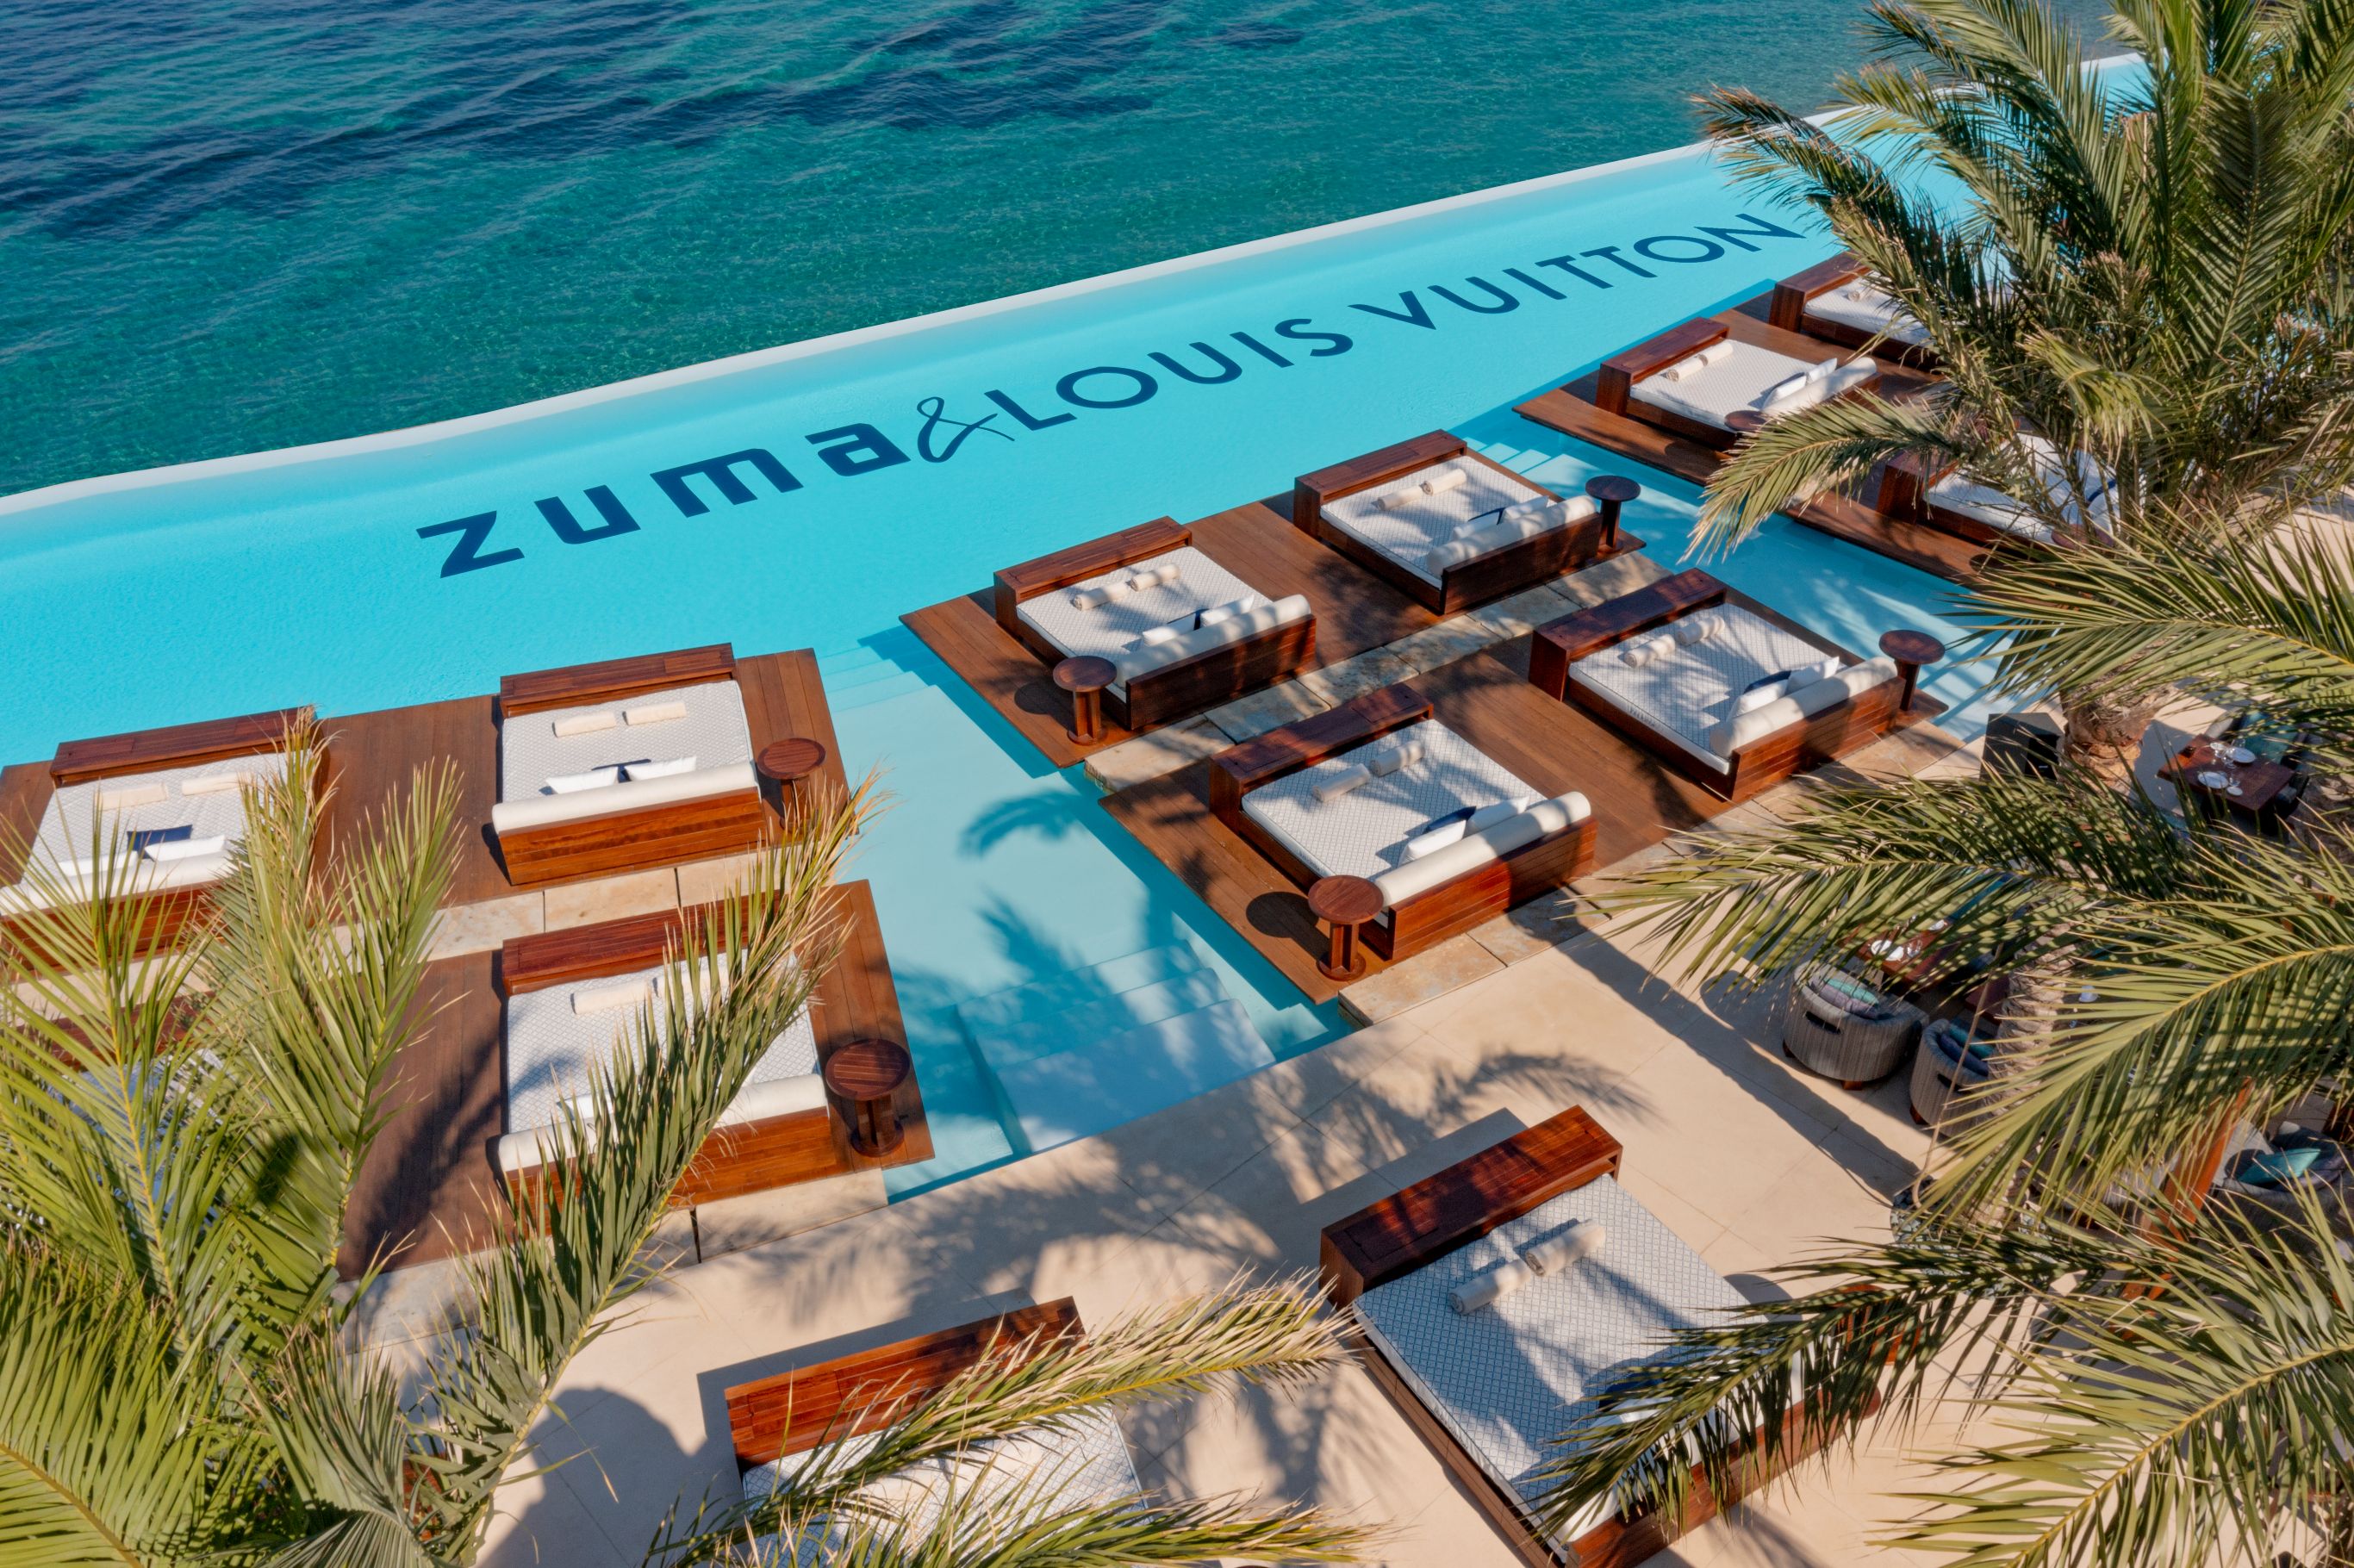 Louis Vuitton And Zuma Unite For A Glamorous Grecian Takeover